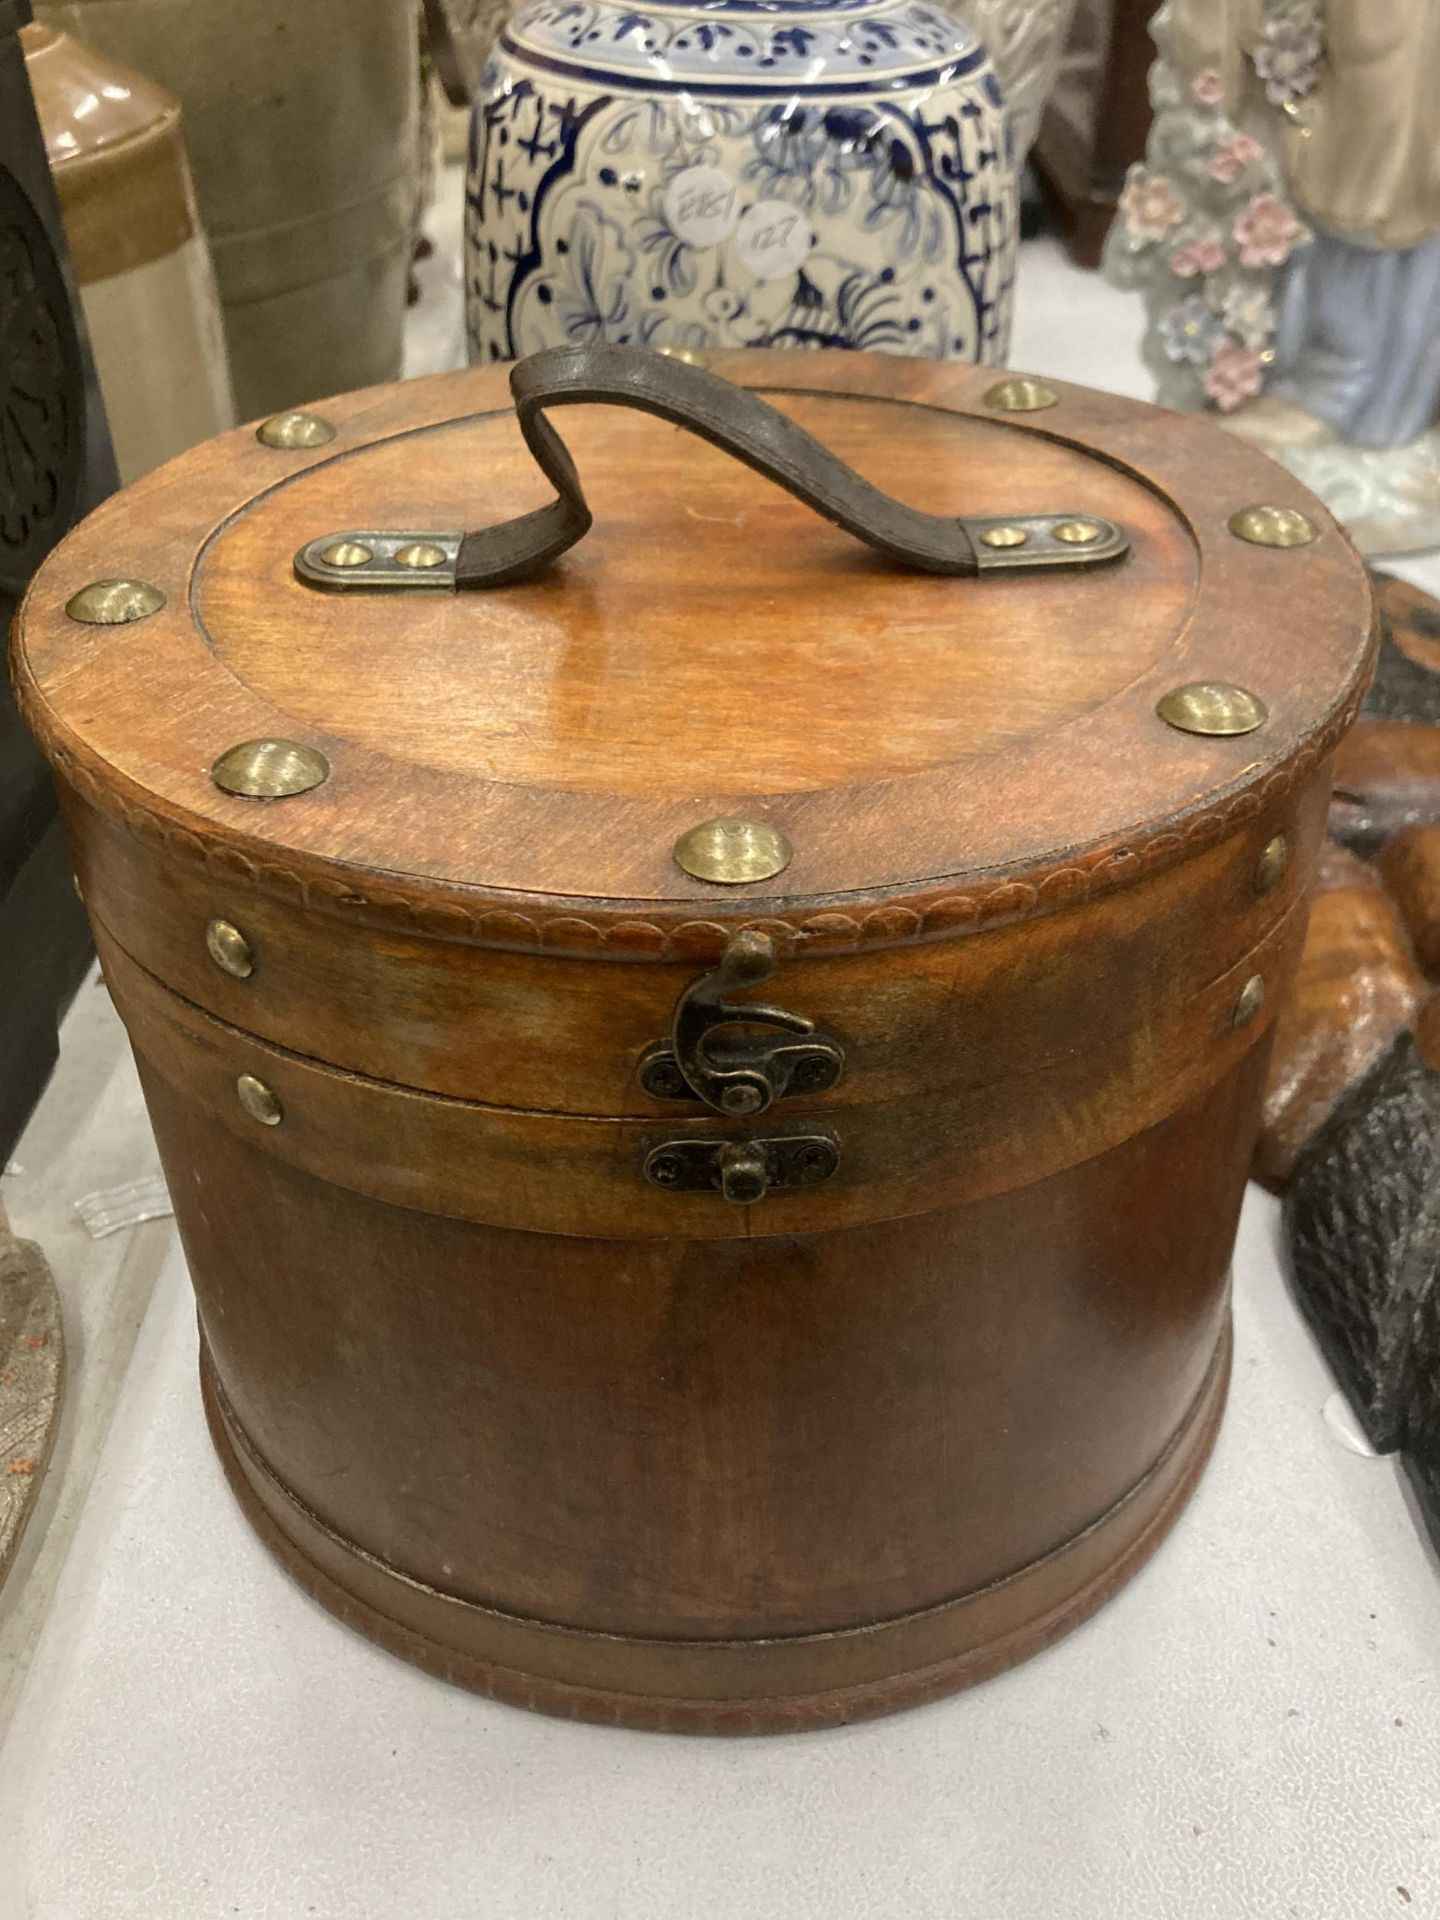 A VINTAGE STYLE ROUND WOODEN BOX WITH HANDLE